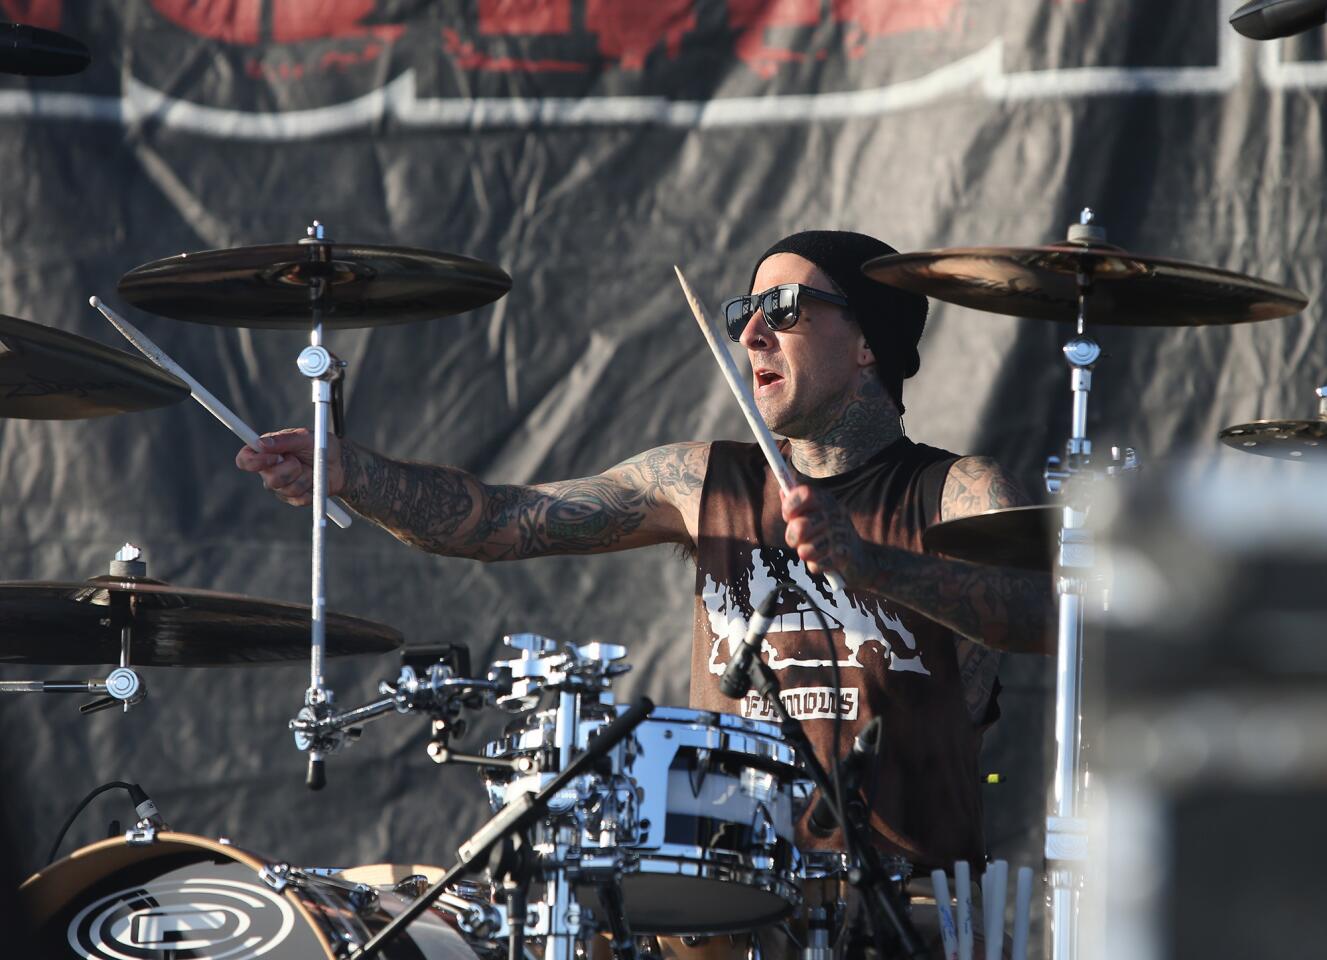 Festival co-presenter Travis Barker of Blink-182 plays drums for Goldfinger during the Back to the Beach Festival on Sunday at Huntington State Beach.